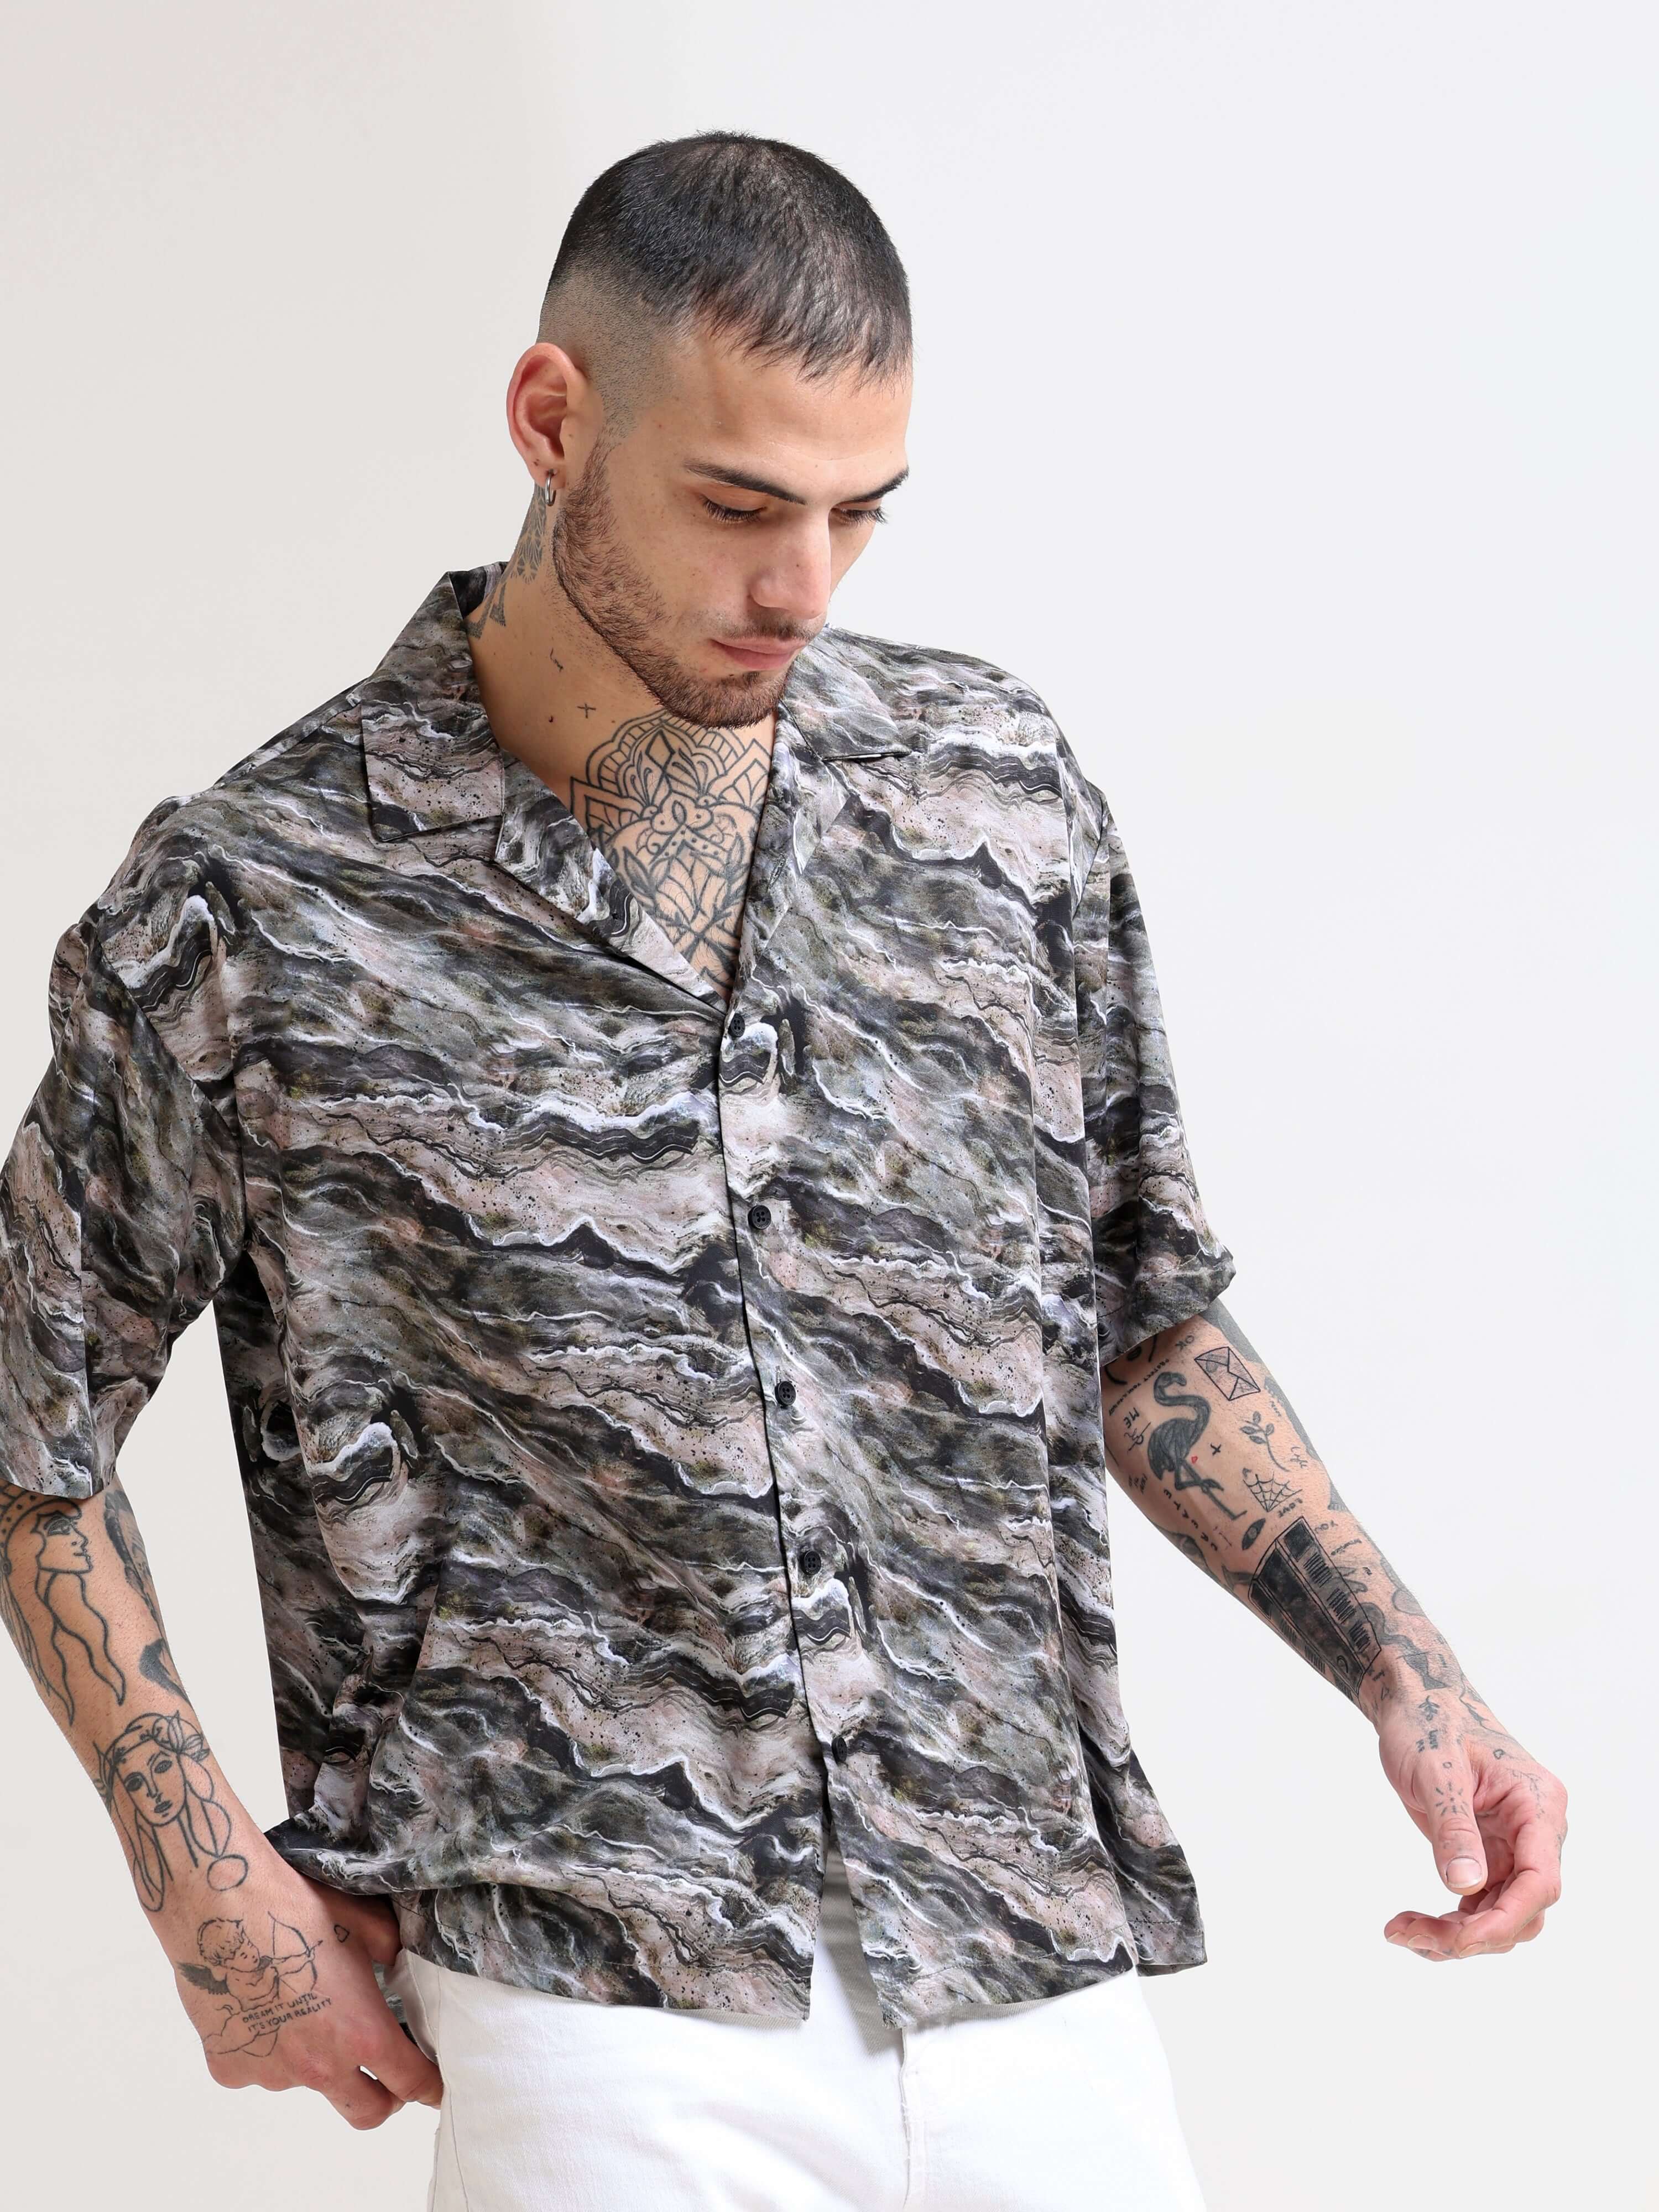 The Attico Oversized Shirt shop online at Estilocus. Our Attico Oversized Shirt is perfect for those sunny days. The relaxed fit and lightweight fabric make it comfortable to wear all day. Its classic style is perfect for those summer streetwear looks. PR